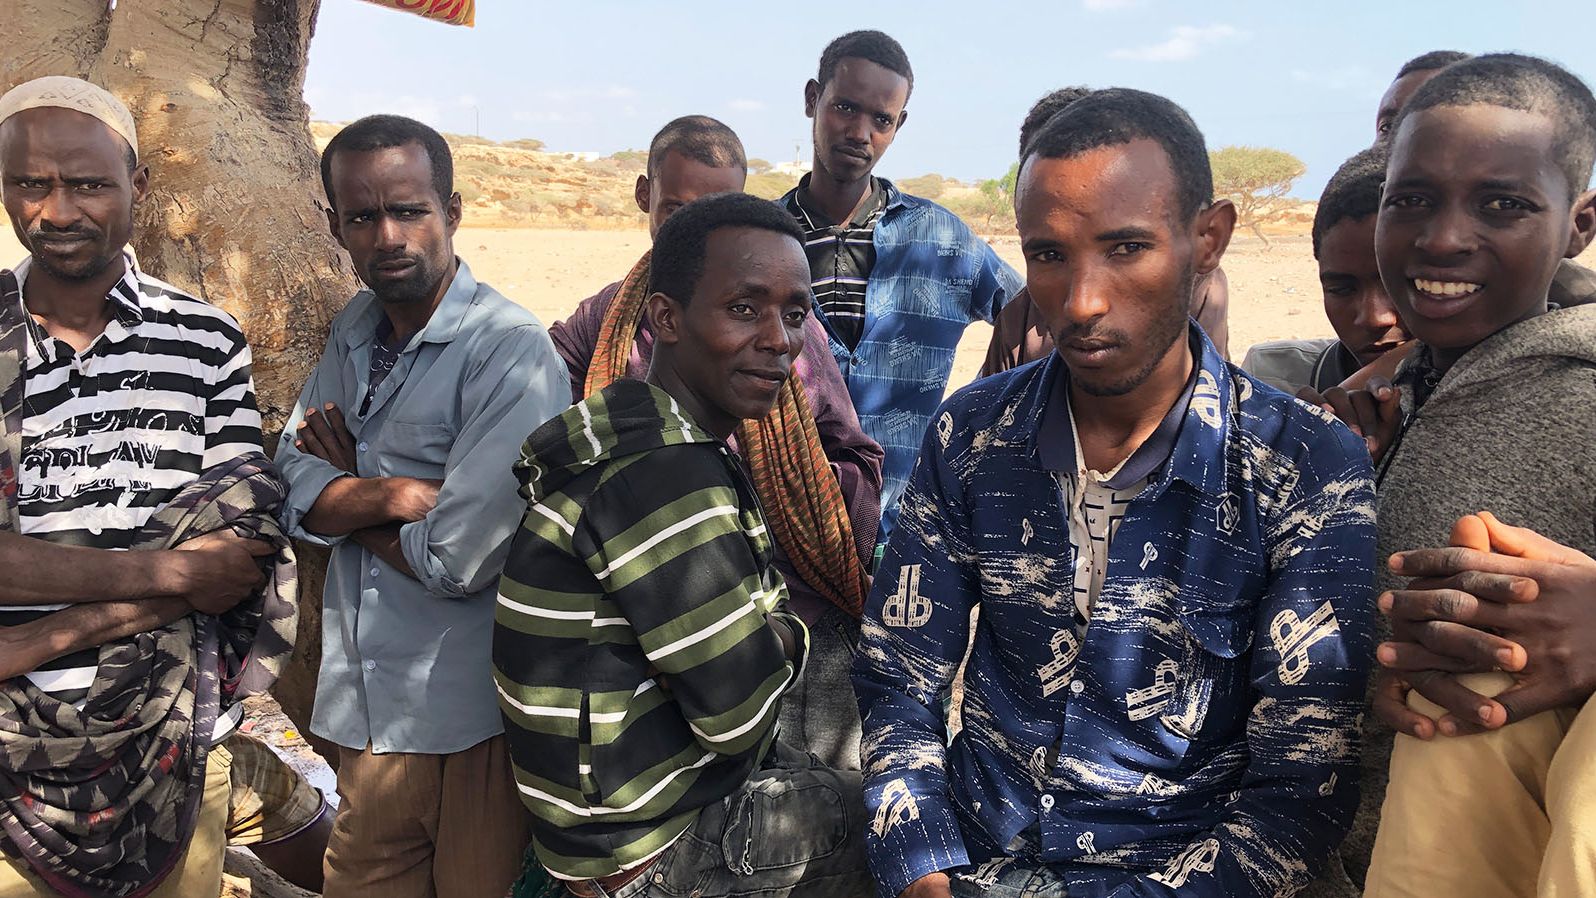 A group of men wait for smugglers to arrive to take them across the Bab al-Mandeb Strait to Yemen. 